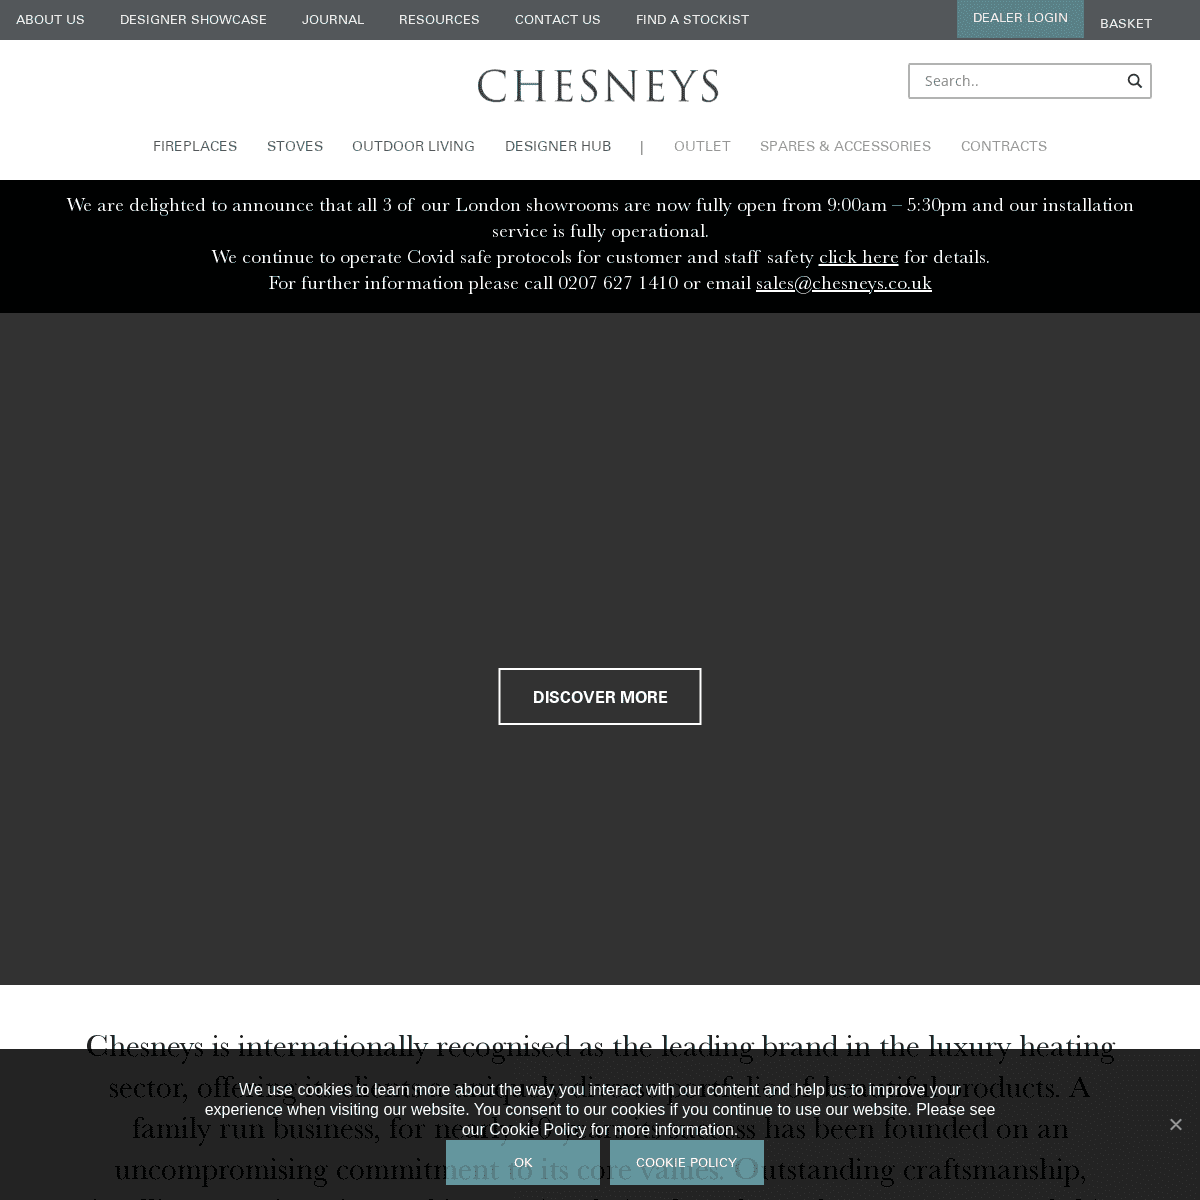 A complete backup of https://chesneys.co.uk